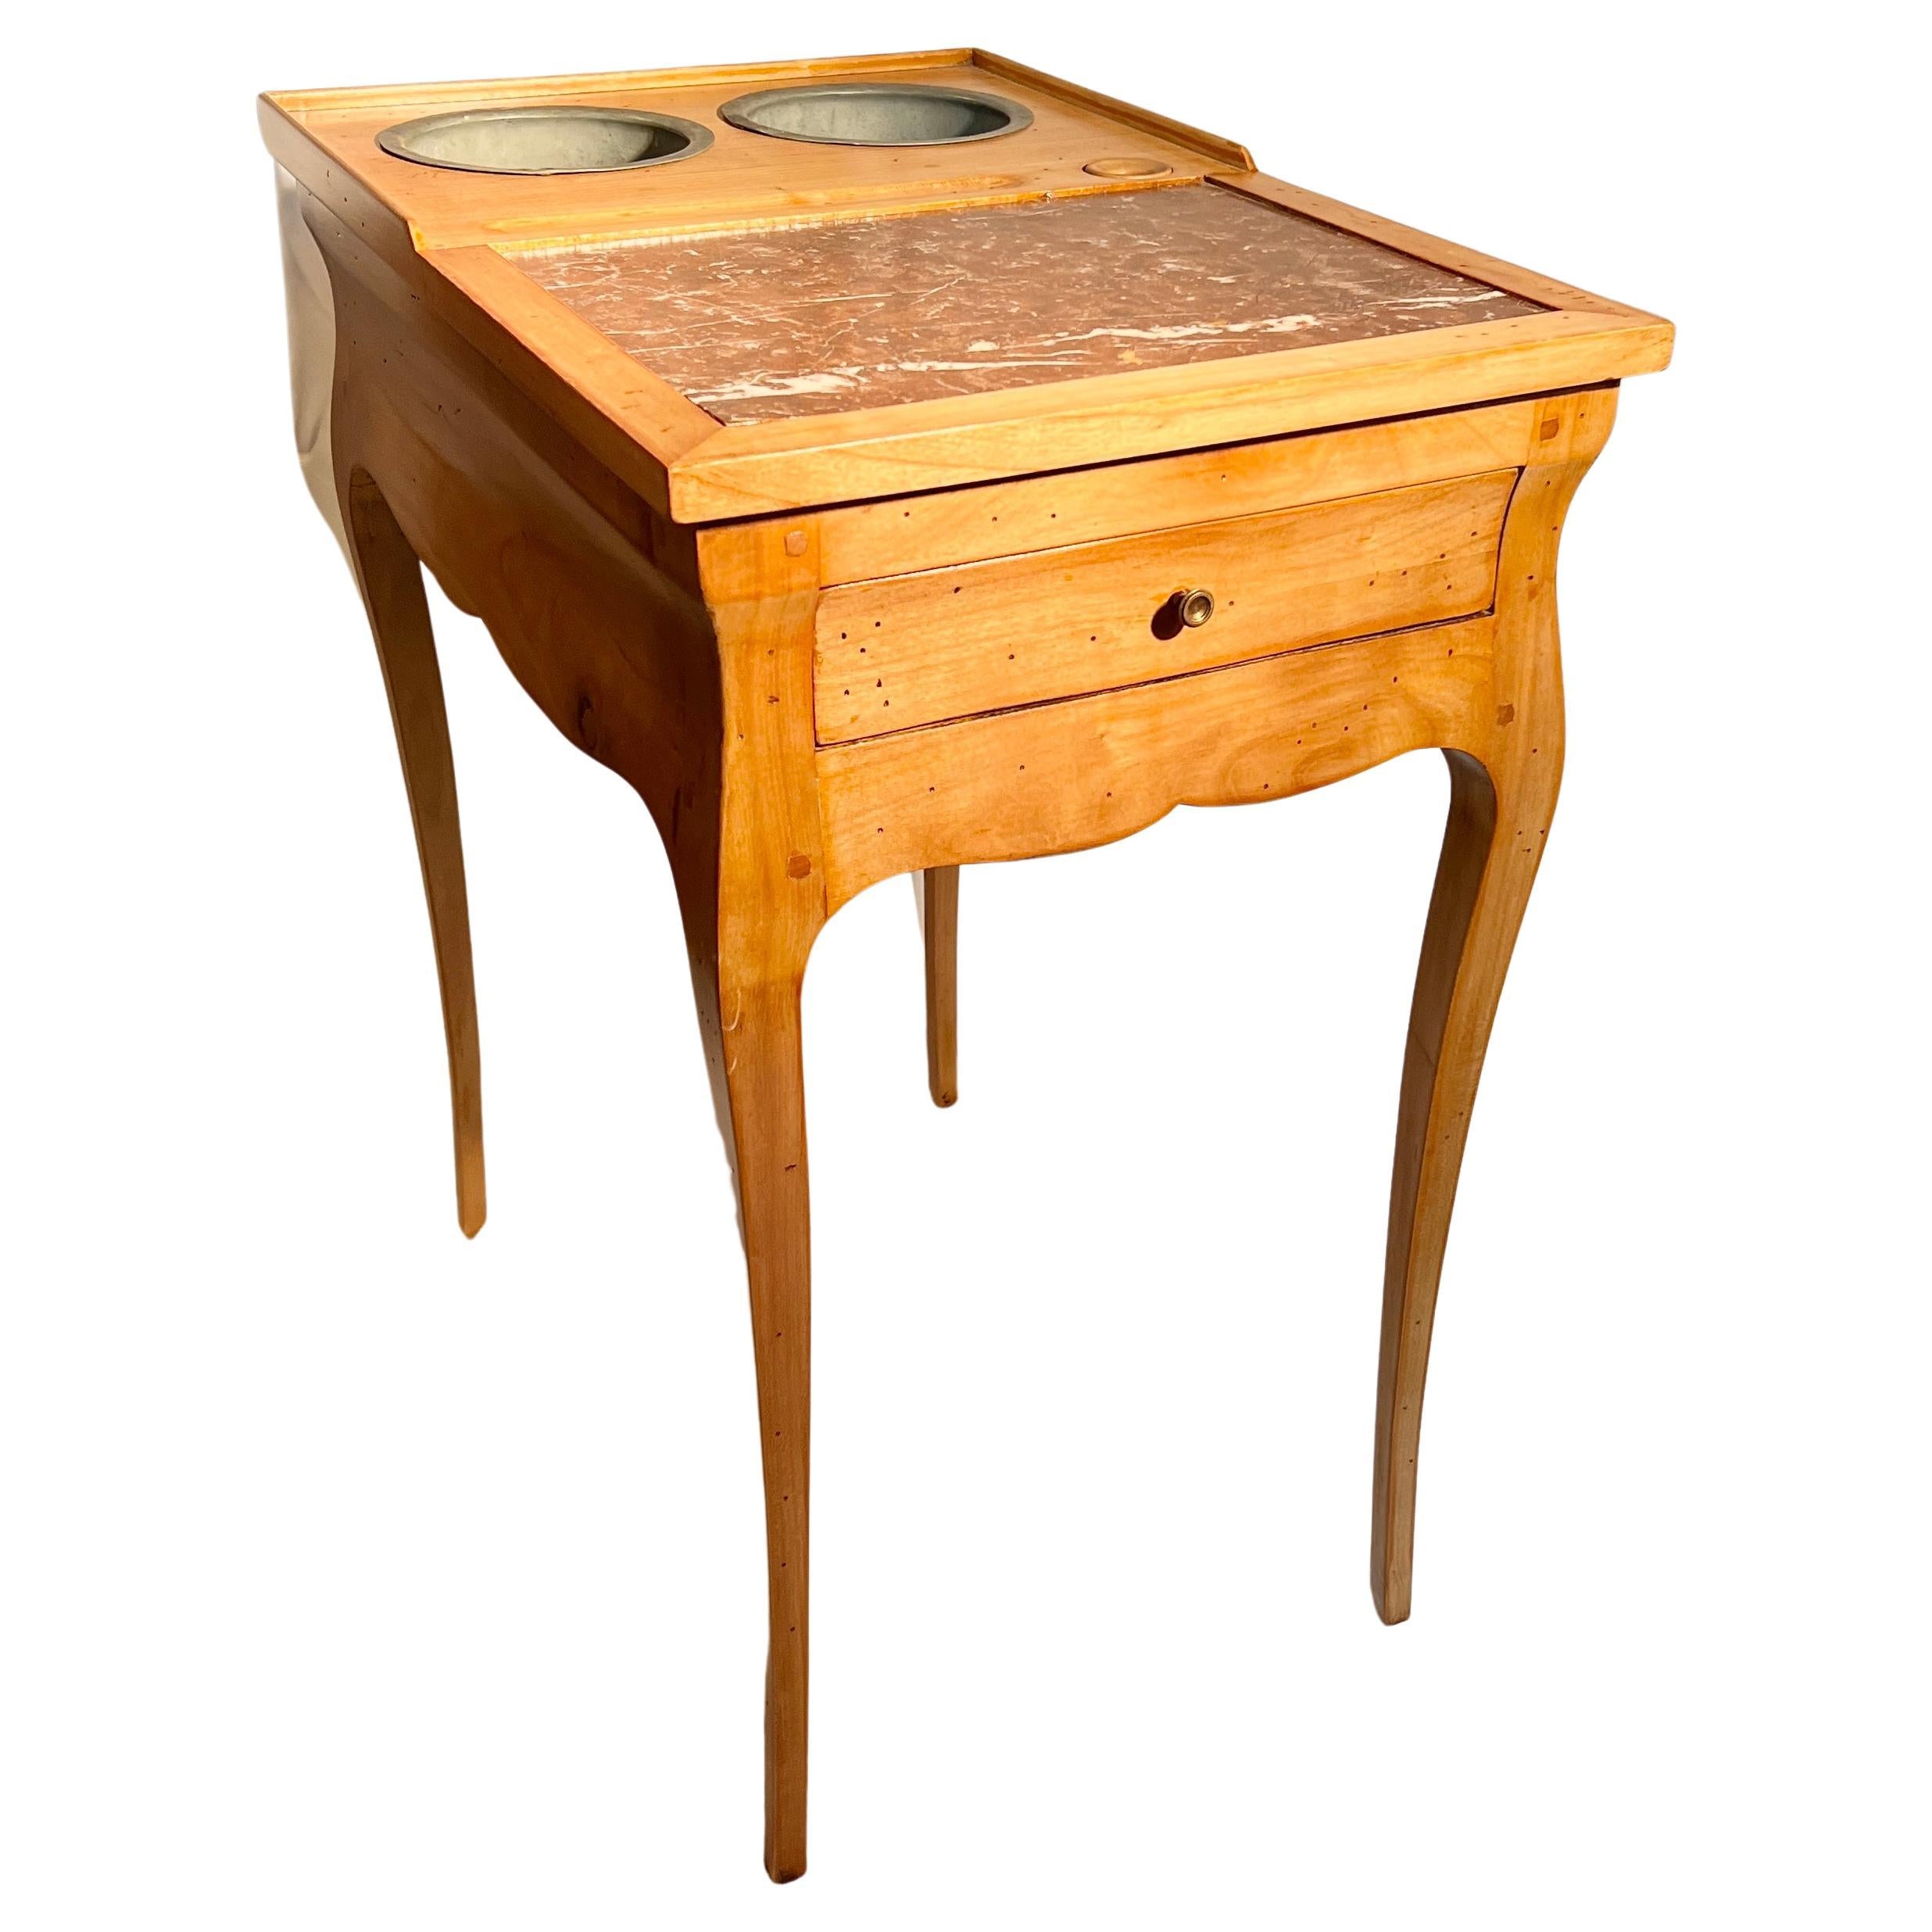 Antique French Walnut & Marble Rafraîchissoir Wine Table with Coolers Circa 1900 For Sale